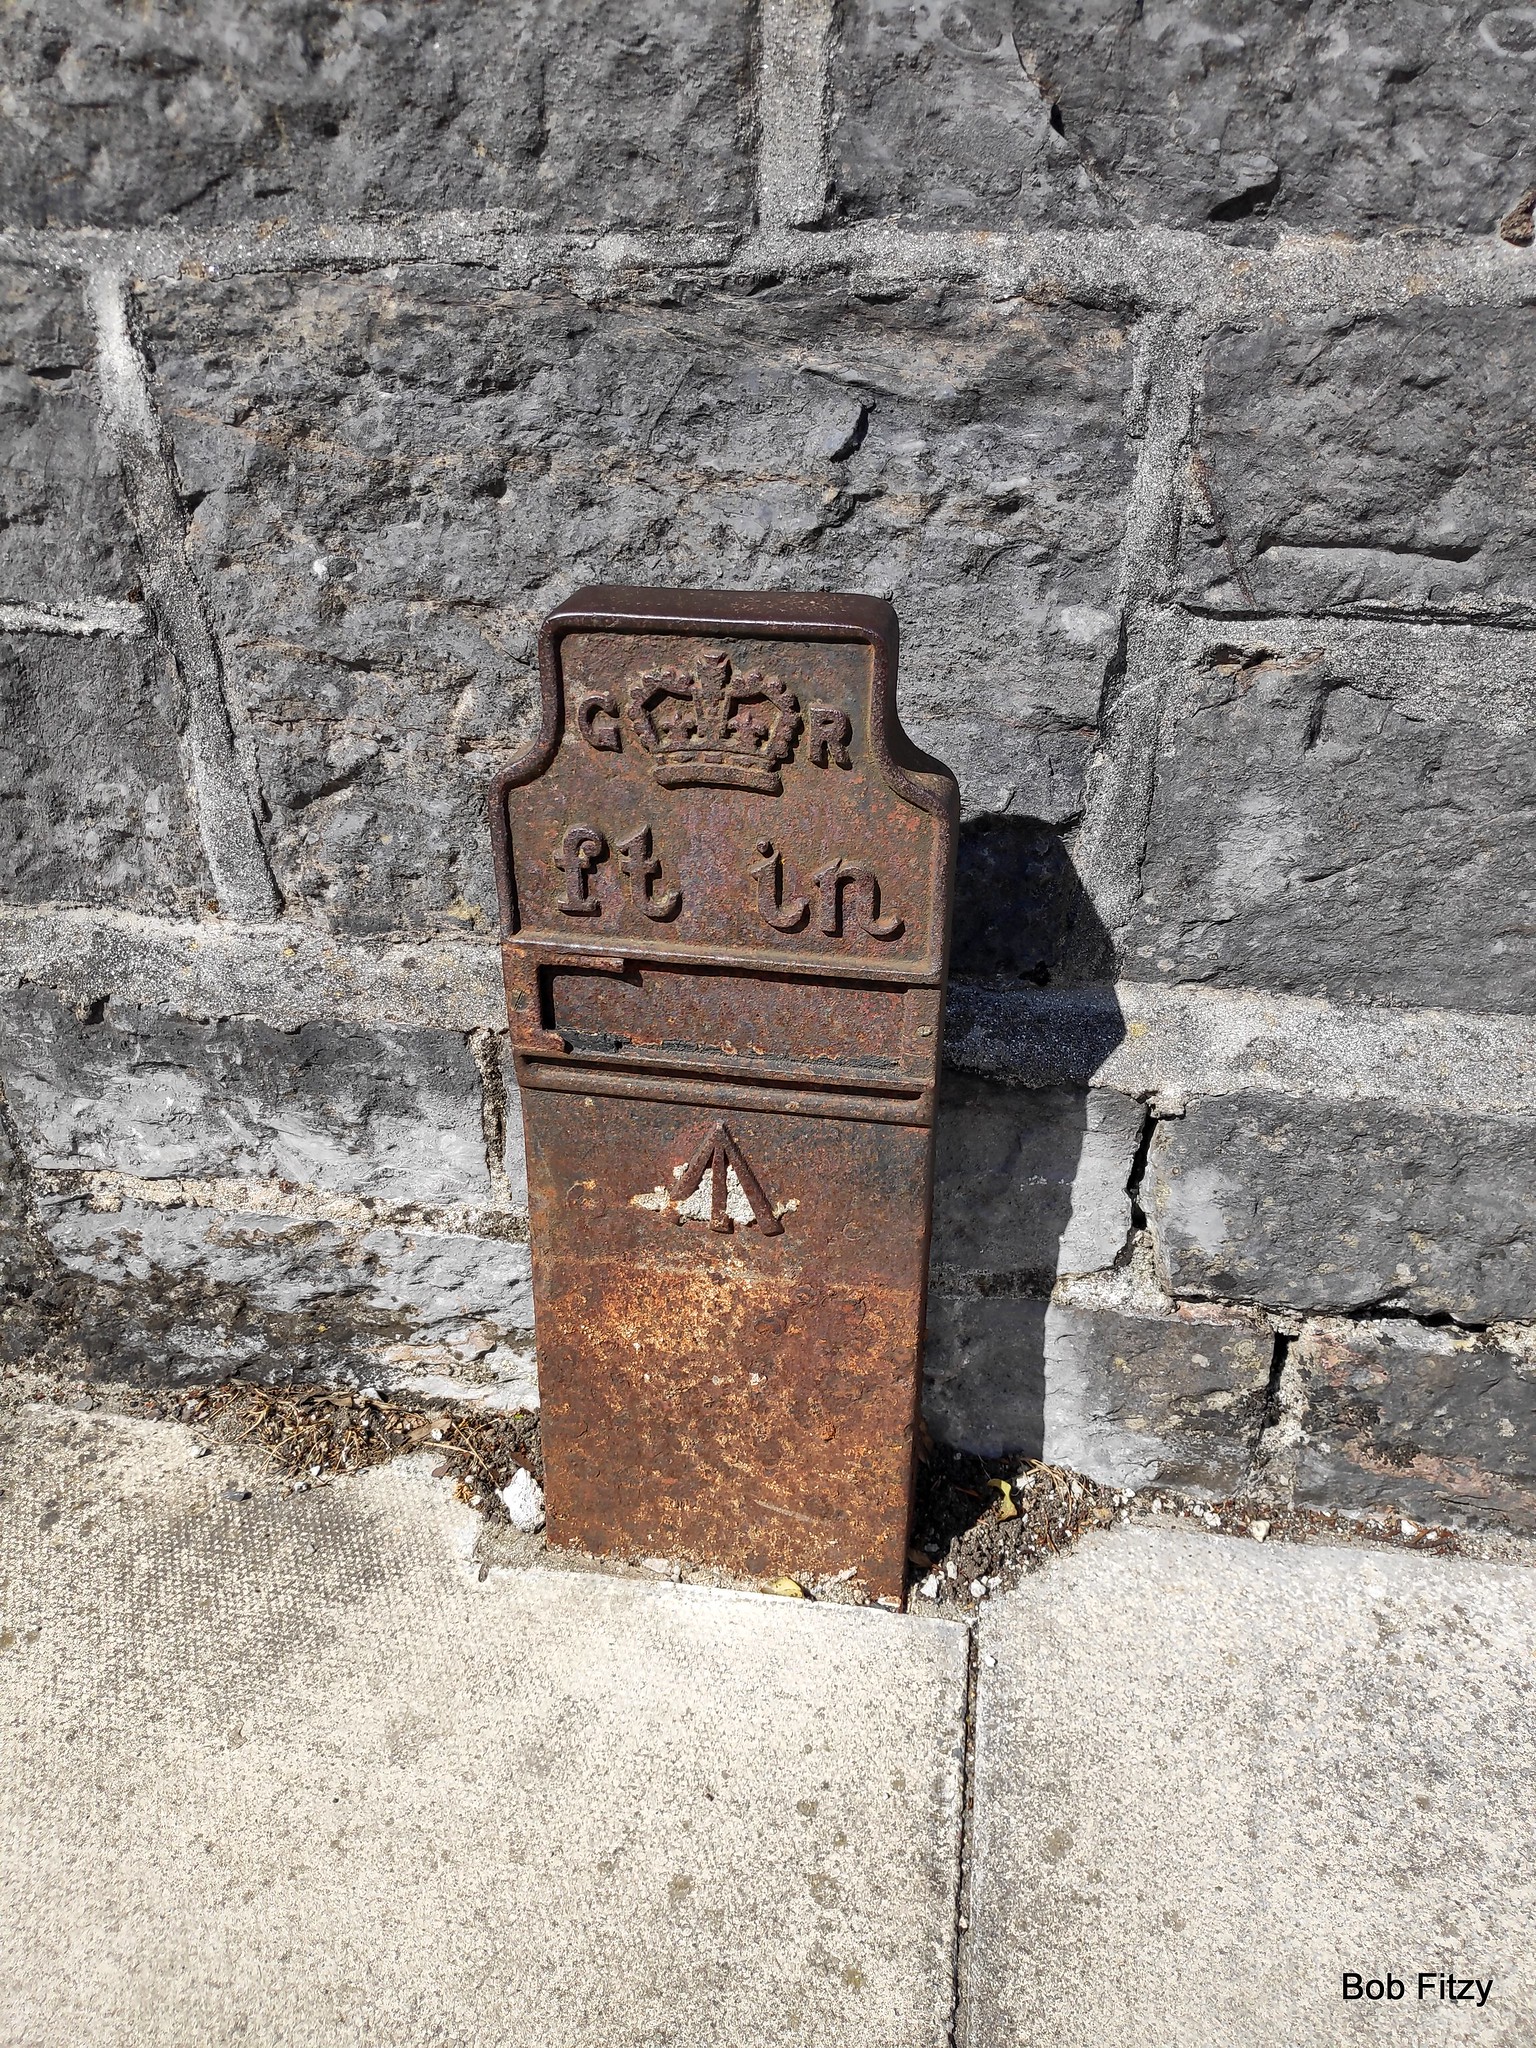 Telegraph cable marker post at 13 Ford Park Road, Plymouth by Bobfitzy62 